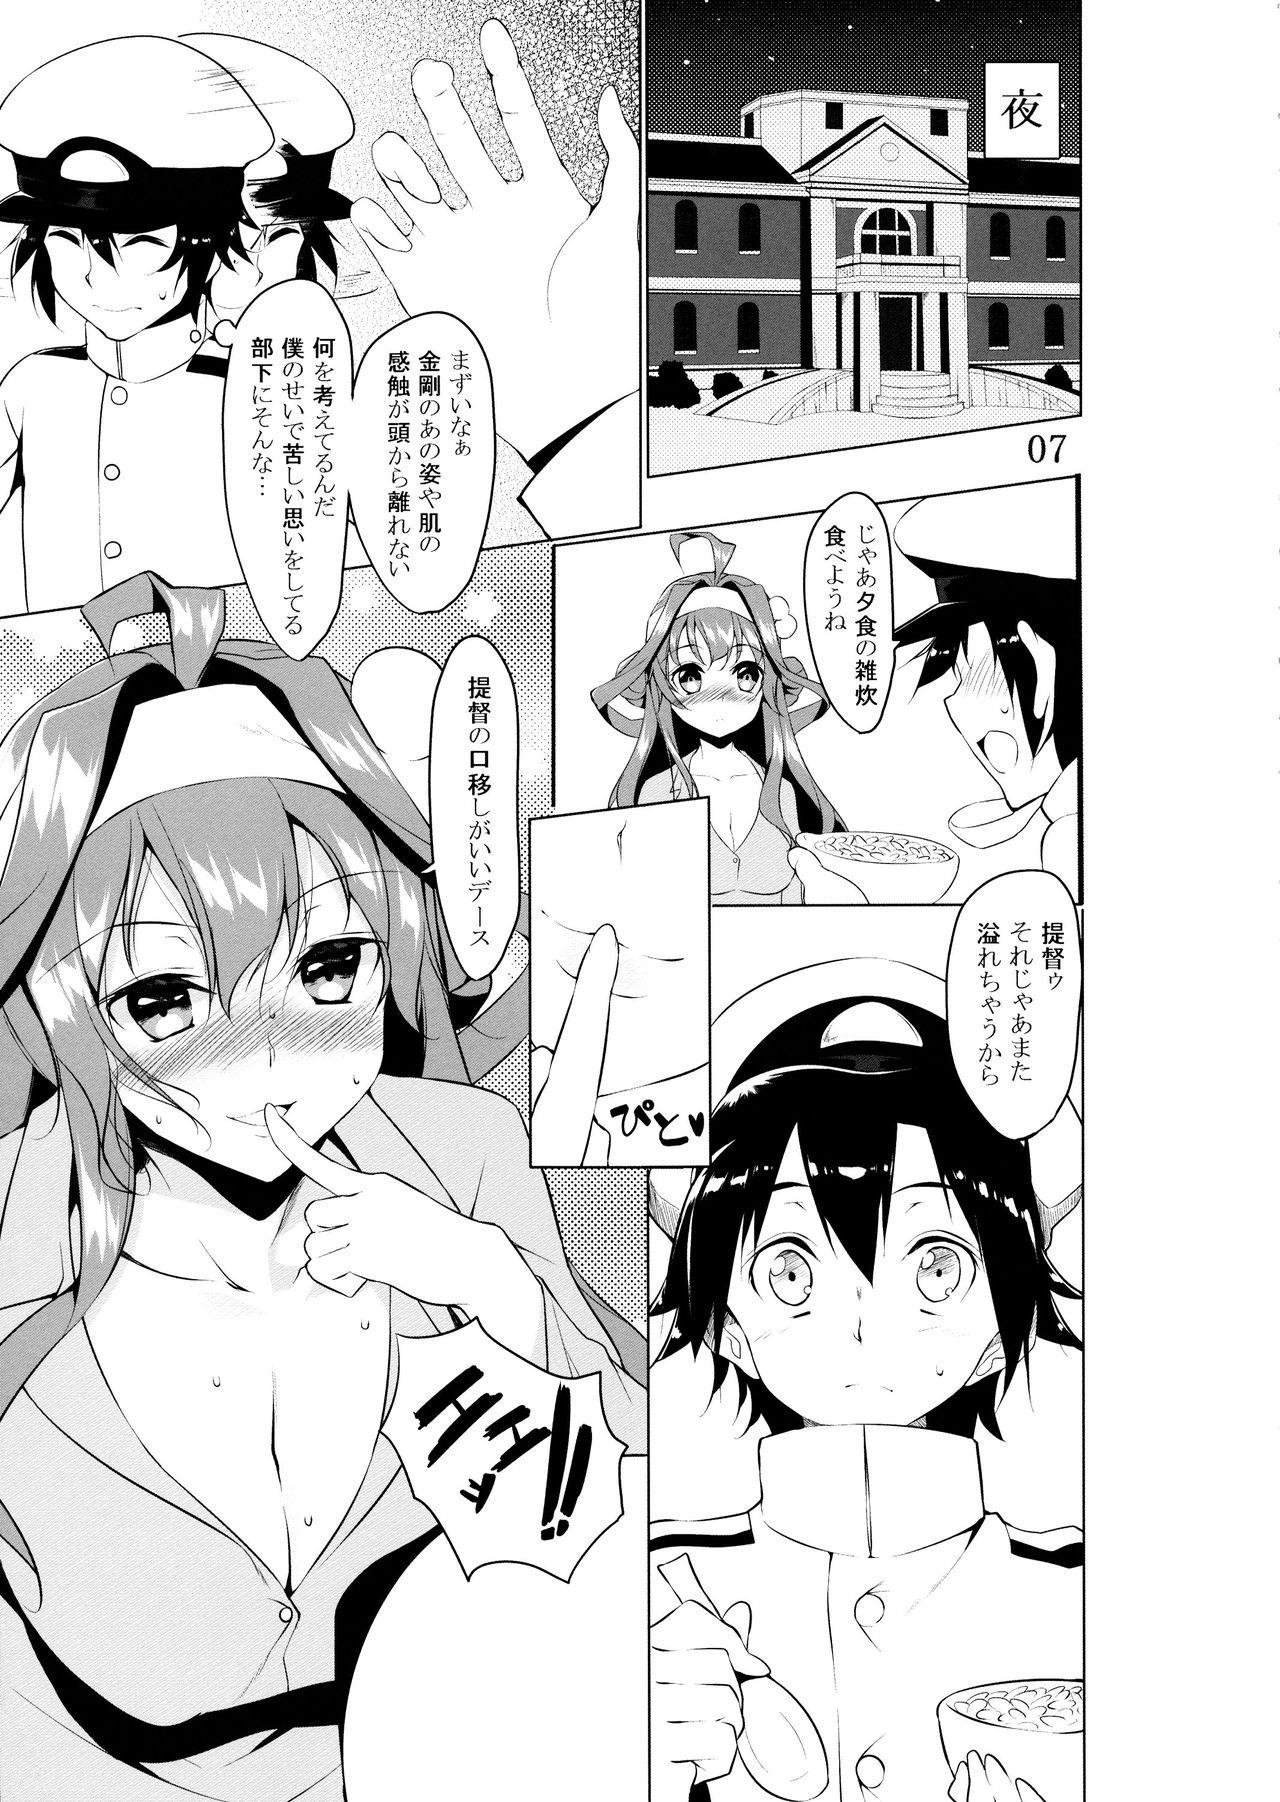 Farting Kanbyou PLEASE - Kantai collection Brunettes - Page 6